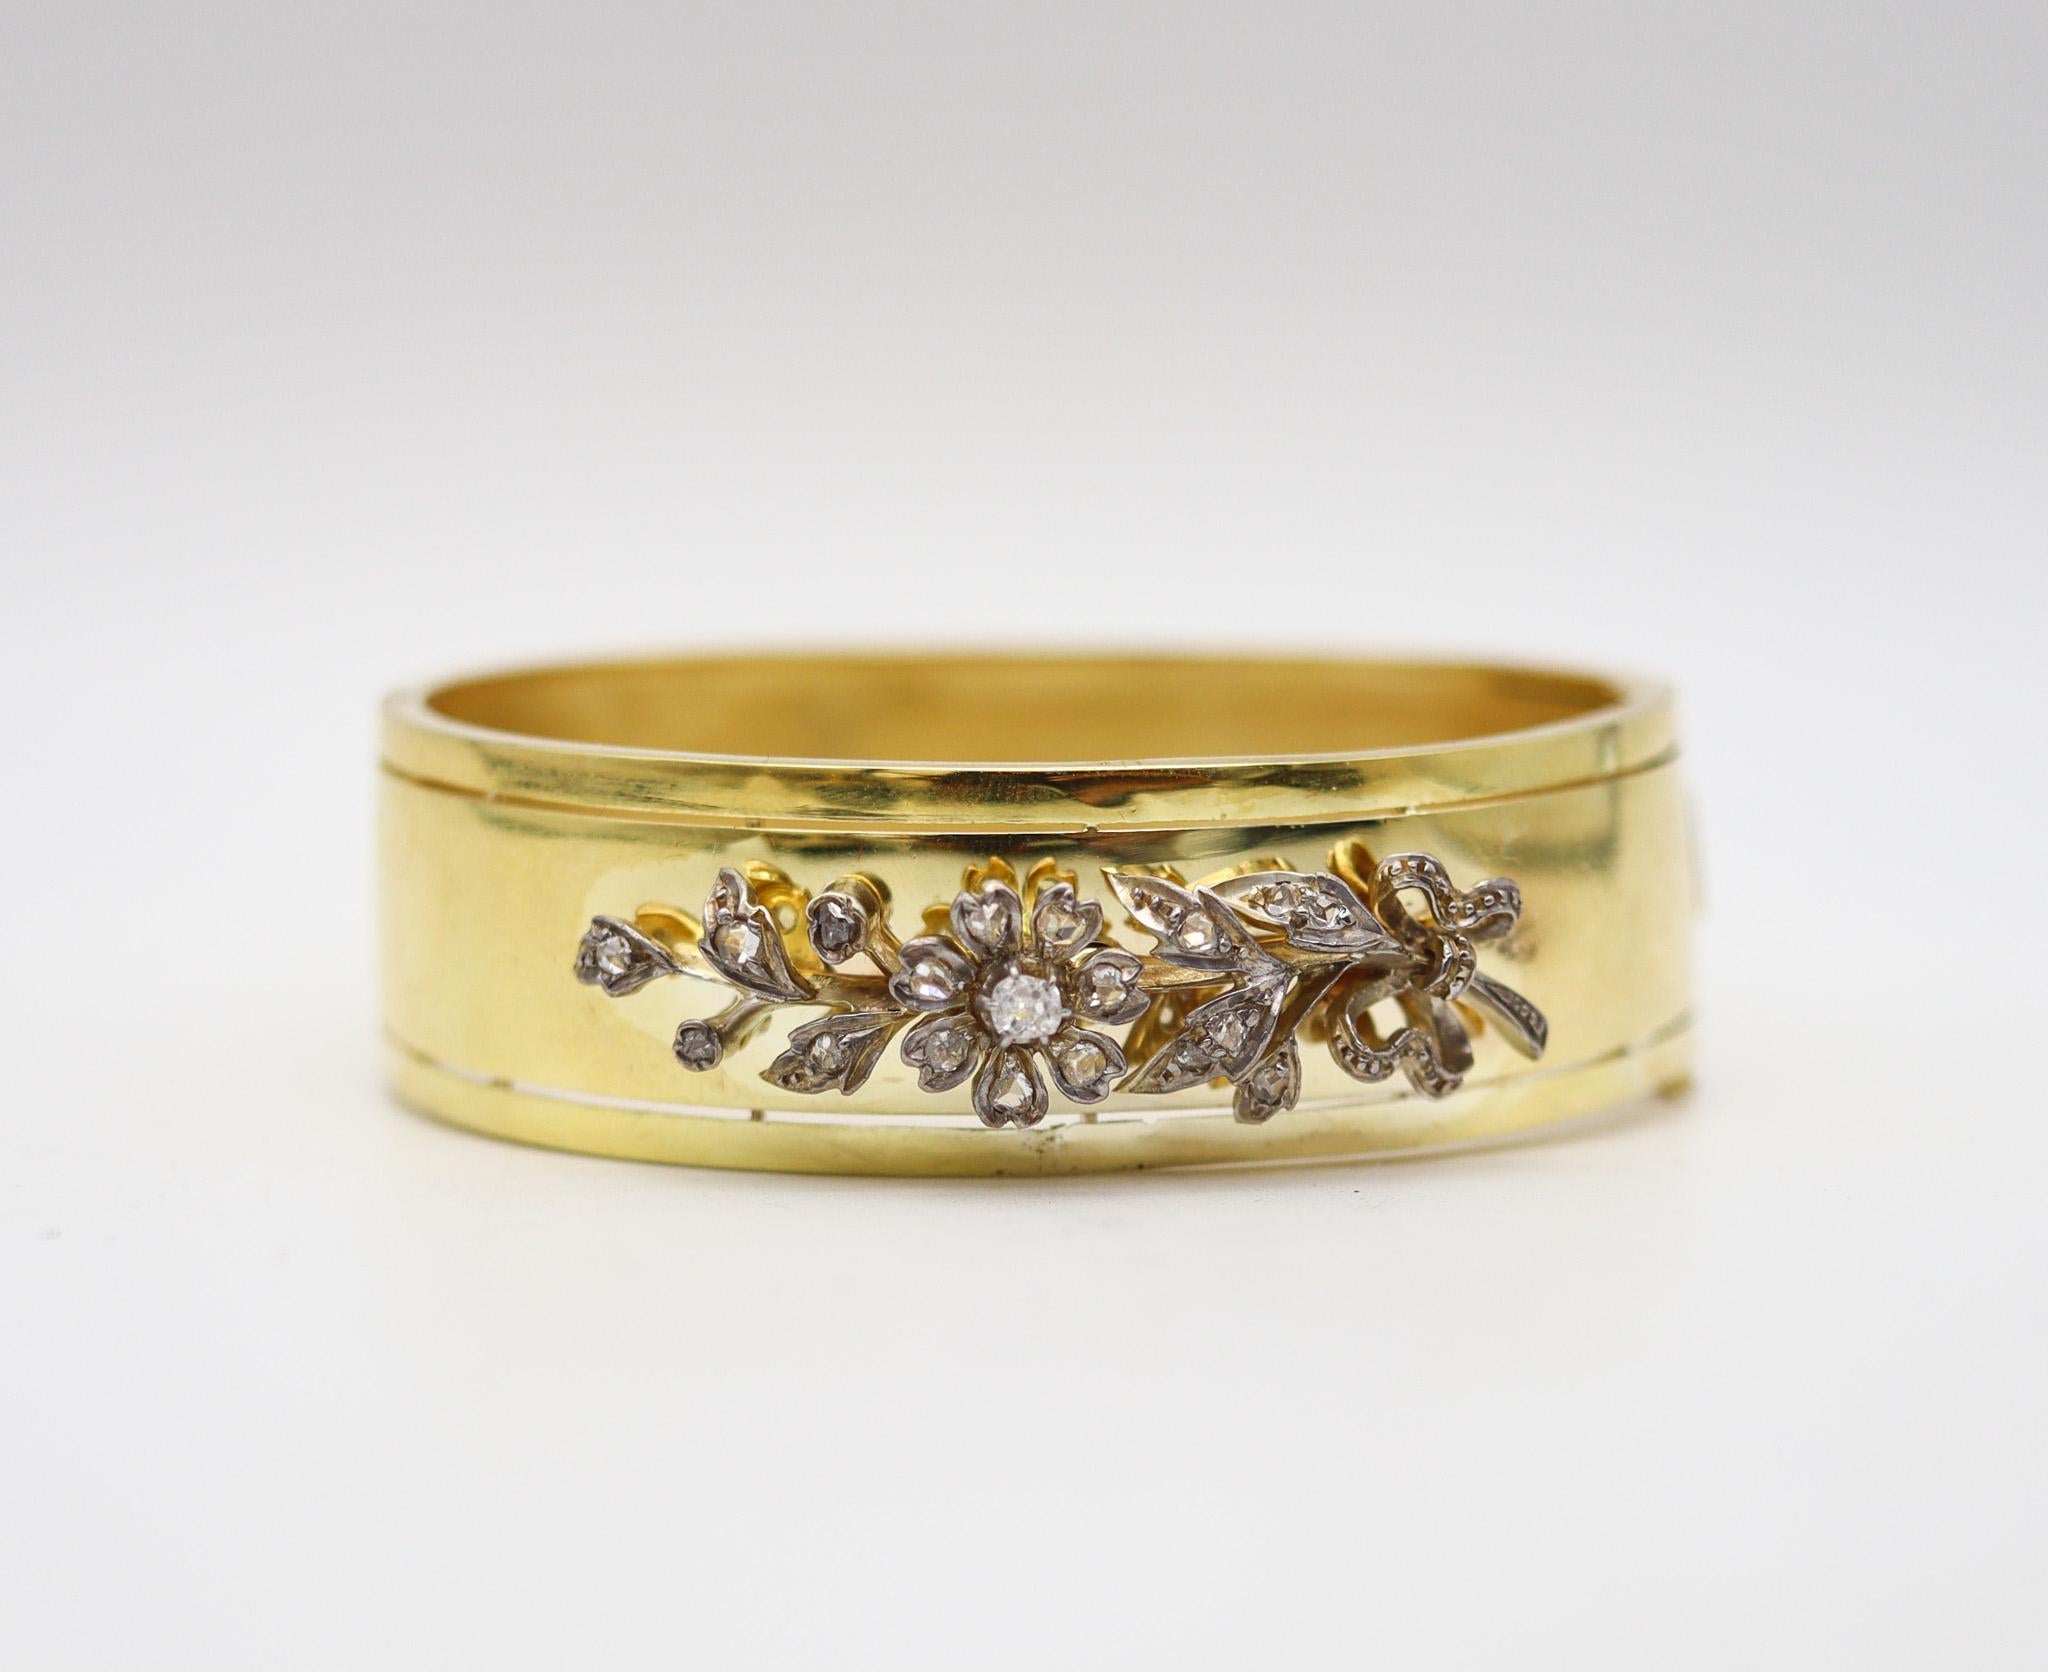 French bracelet from the Victorian period.

A sober classical piece, created in France in the middle of the 19th century, circa 1850's. This bangle bracelet has been crafted during the Victorian era (1837-1901) in yellow gold of 14 karats and and